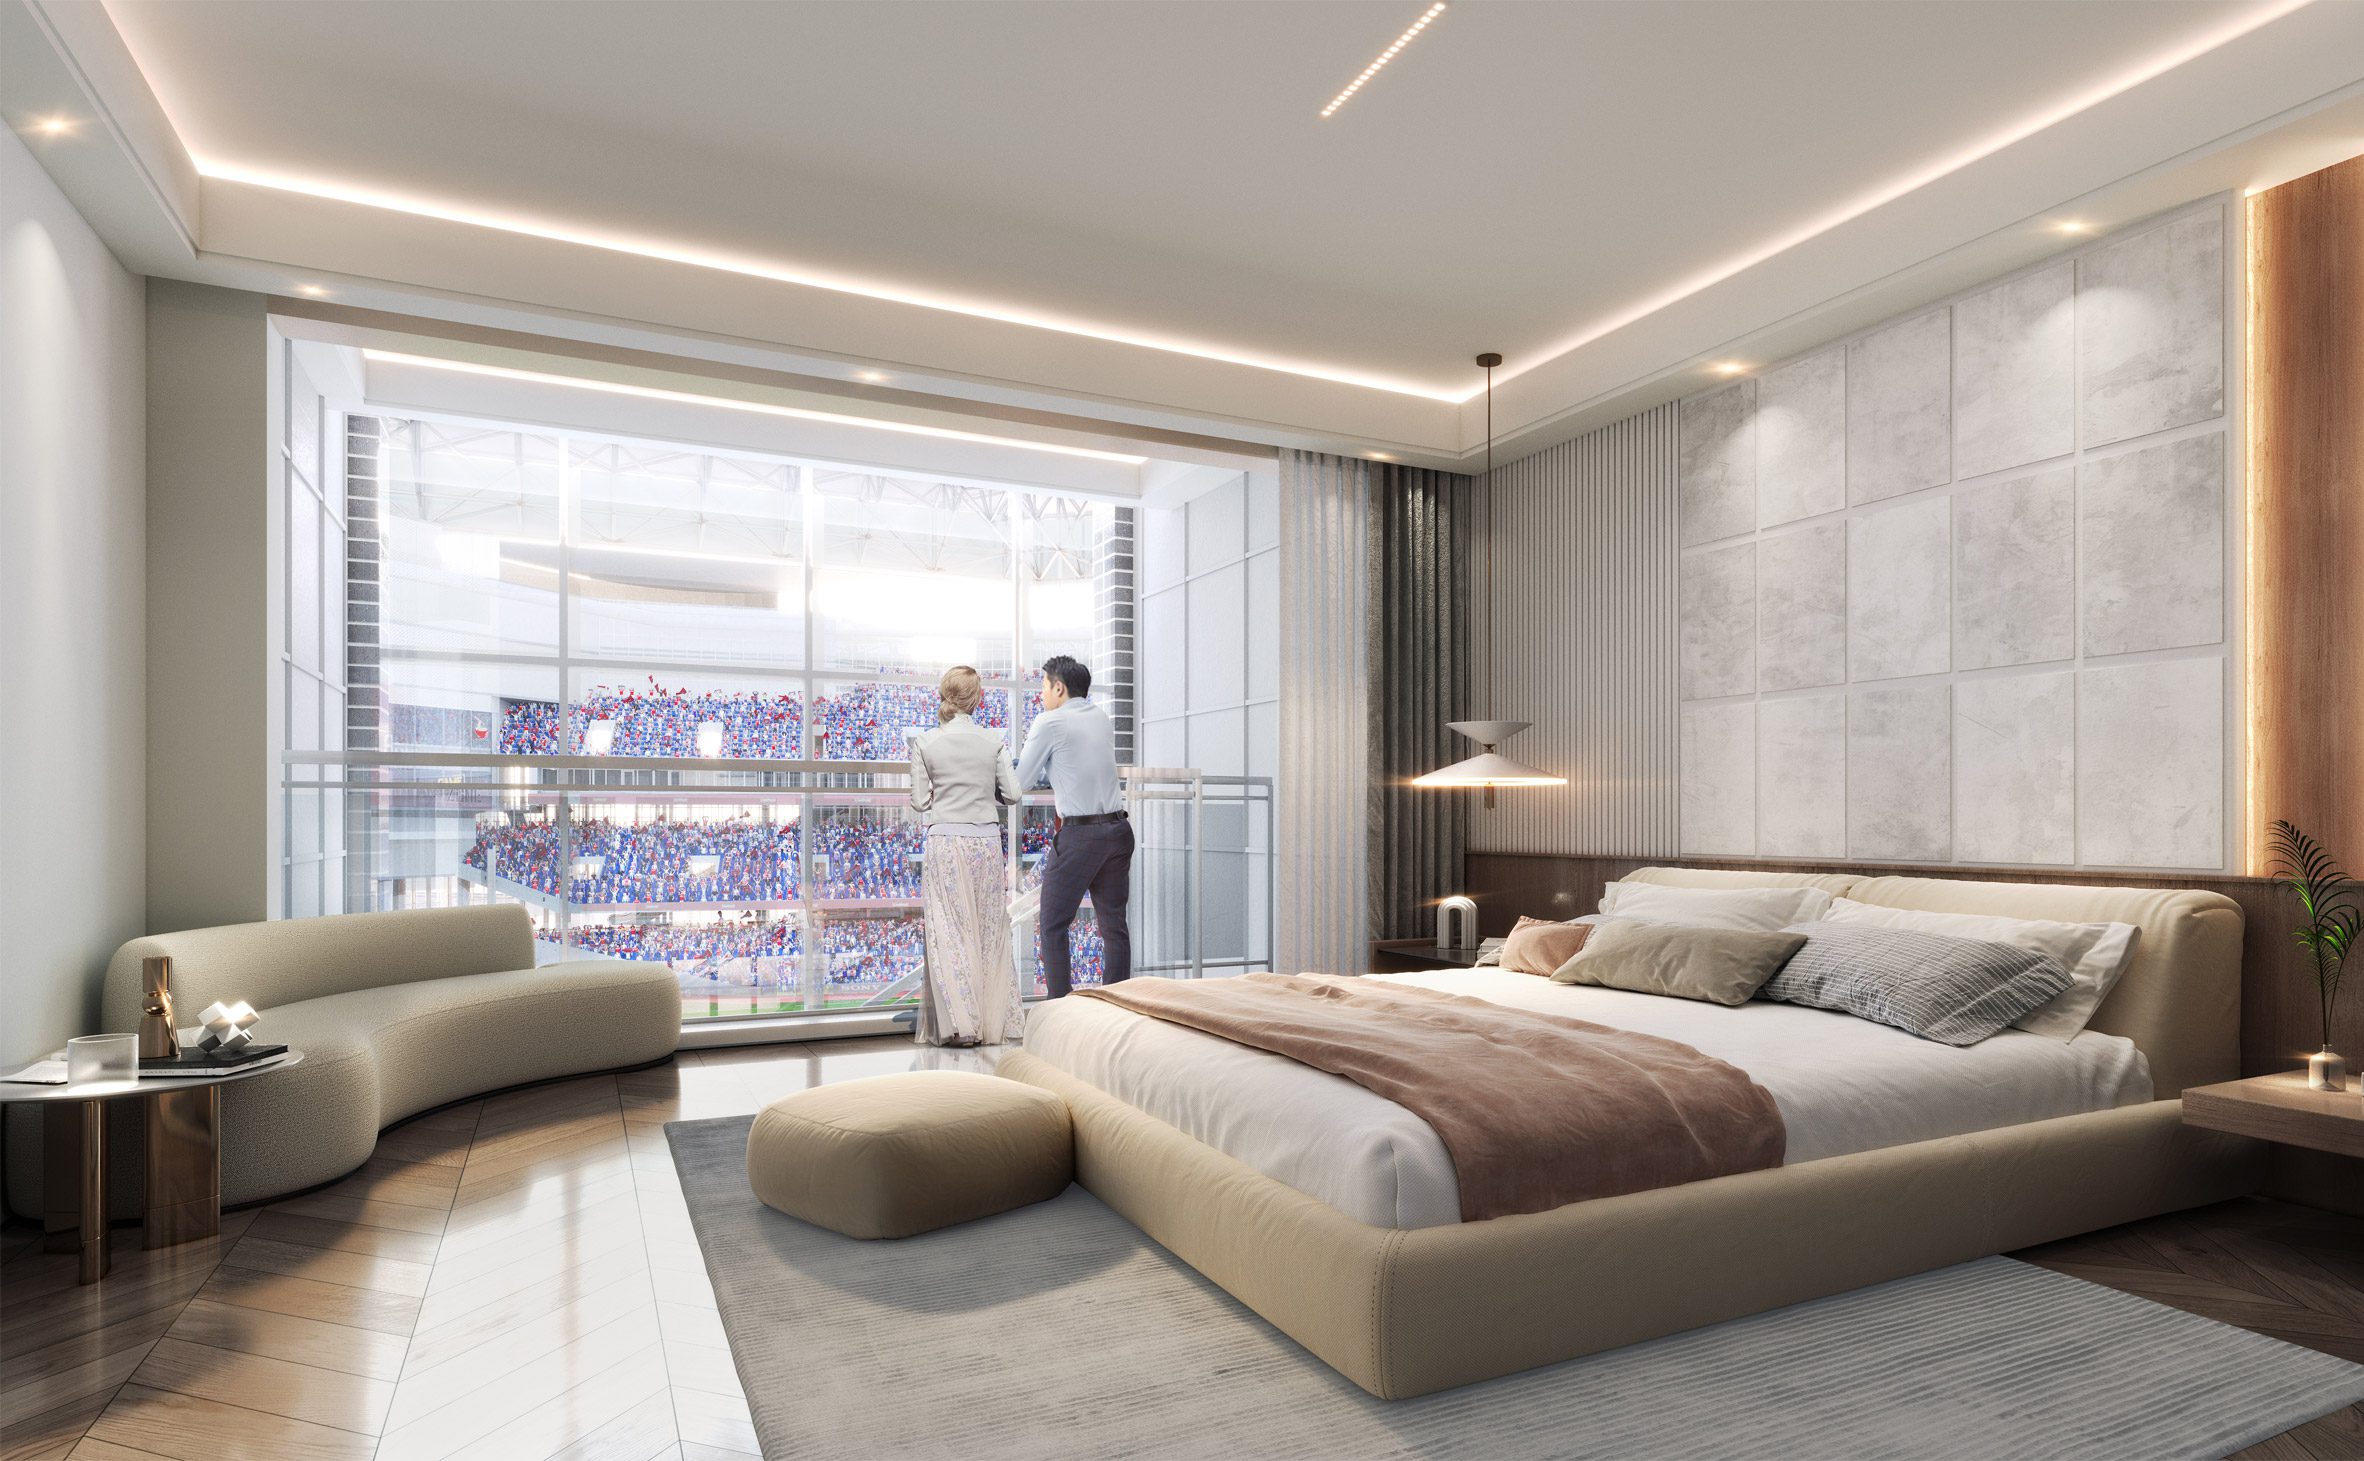 Render of a hotel suite overlooking a stadium